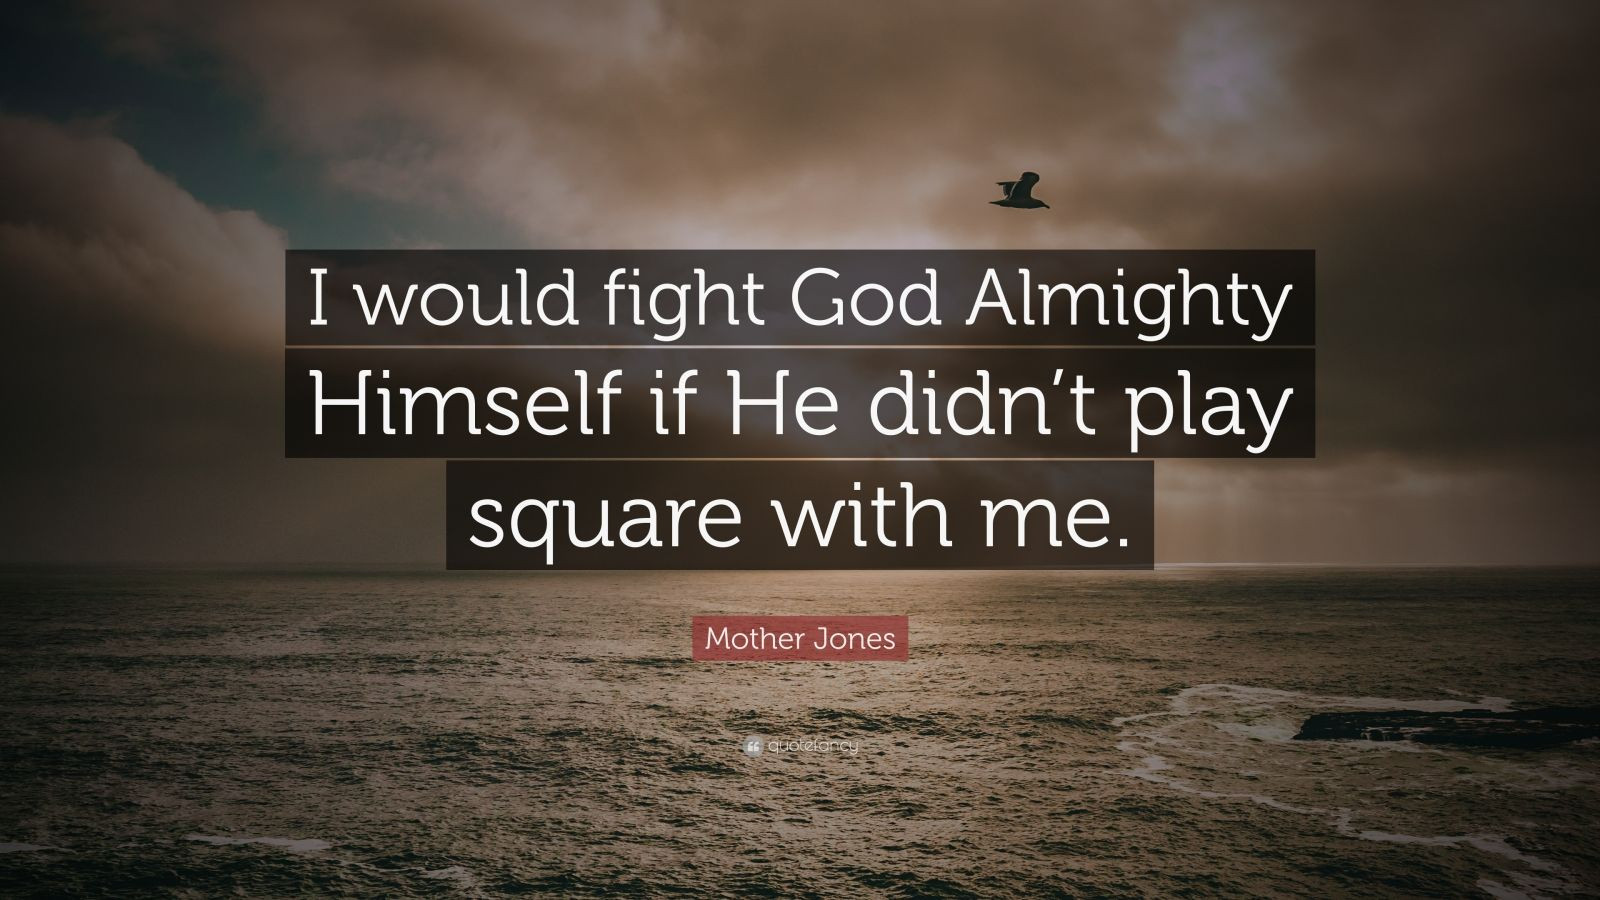 Mother Jones Quote
 Mother Jones Quote “I would fight God Almighty Himself if